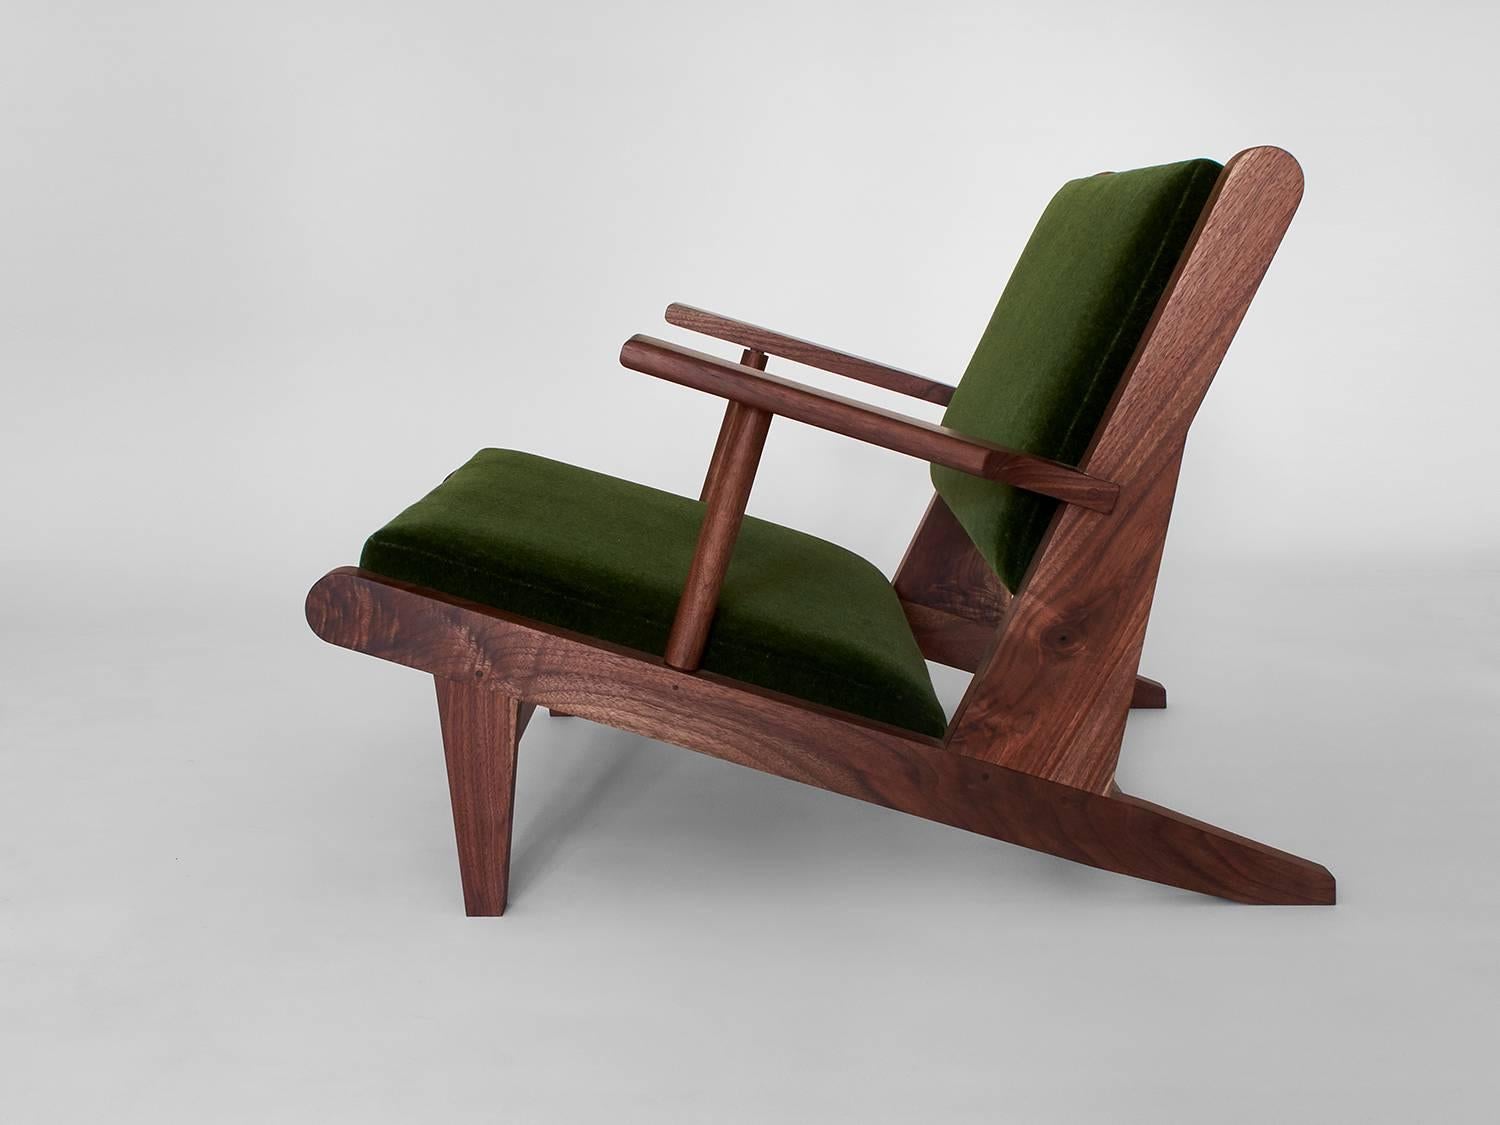 The hunting chair is inspired by Scandinavian furniture of the middle 20th century. It sits near the floor for an impactful statement around fireplaces and other living spaces. It is available in black walnut (natural, oxidized or ebonized), maple